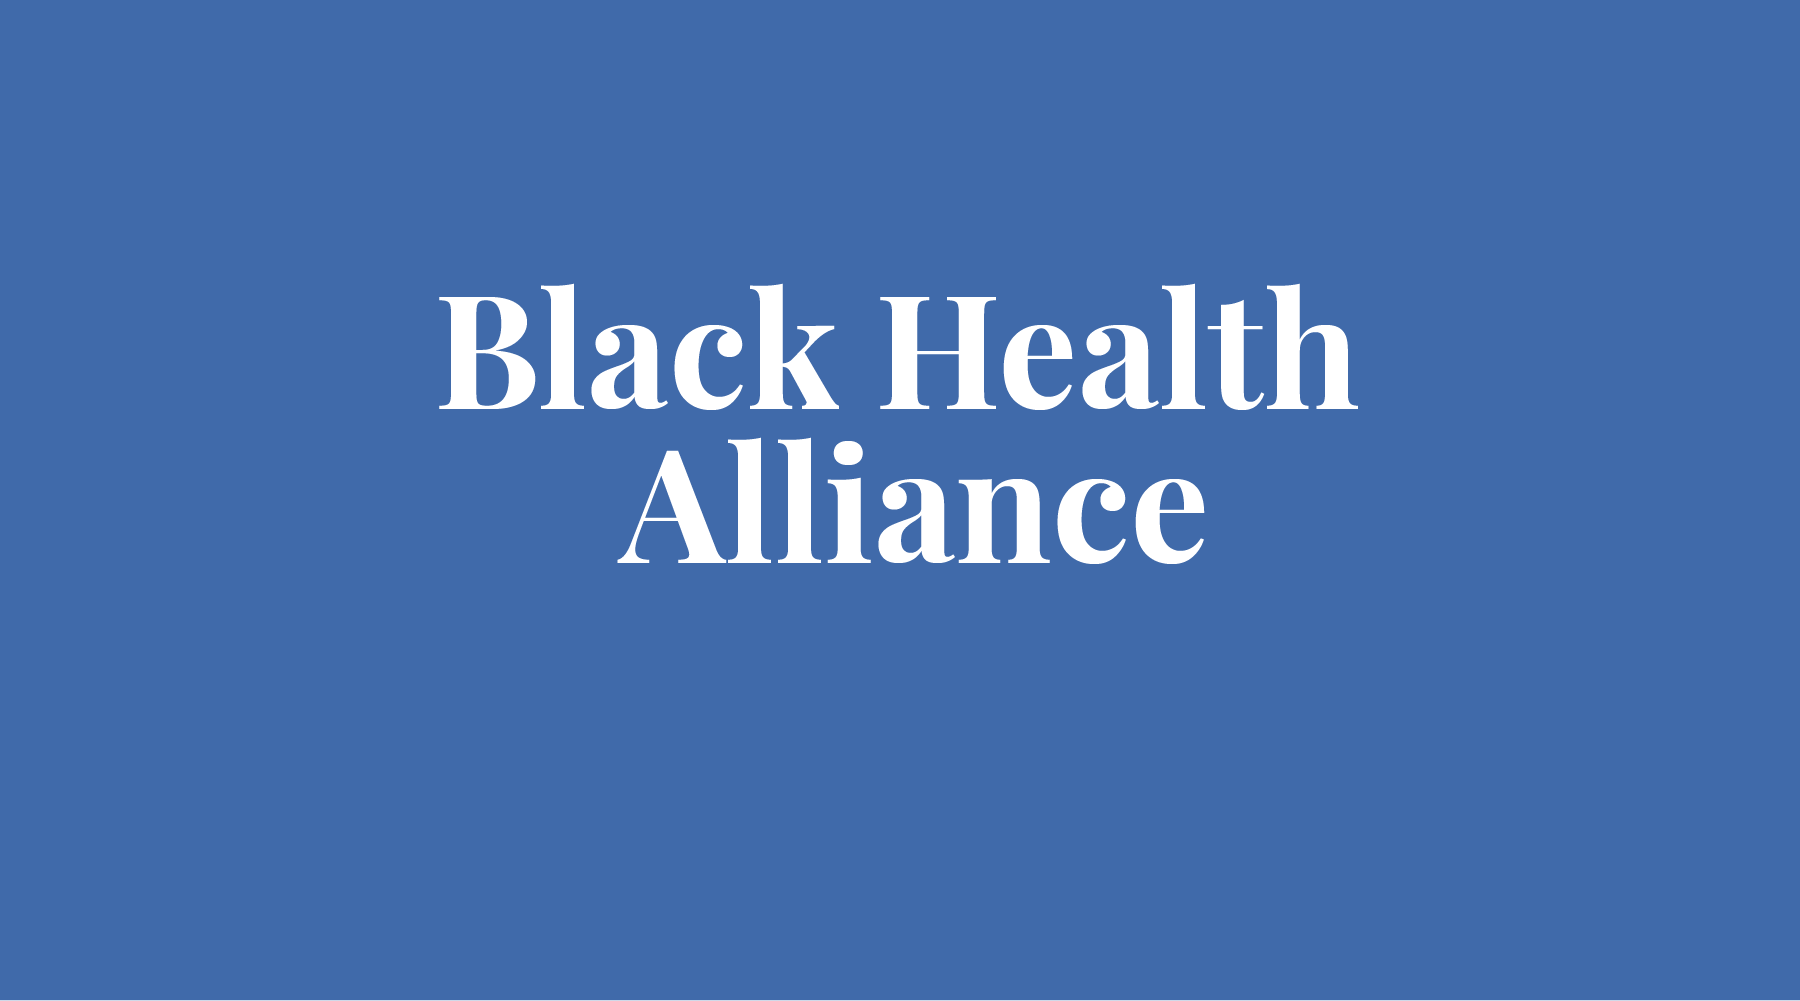 OUR MAY NON-PROFIT - BLACK HEALTH ALLIANCE